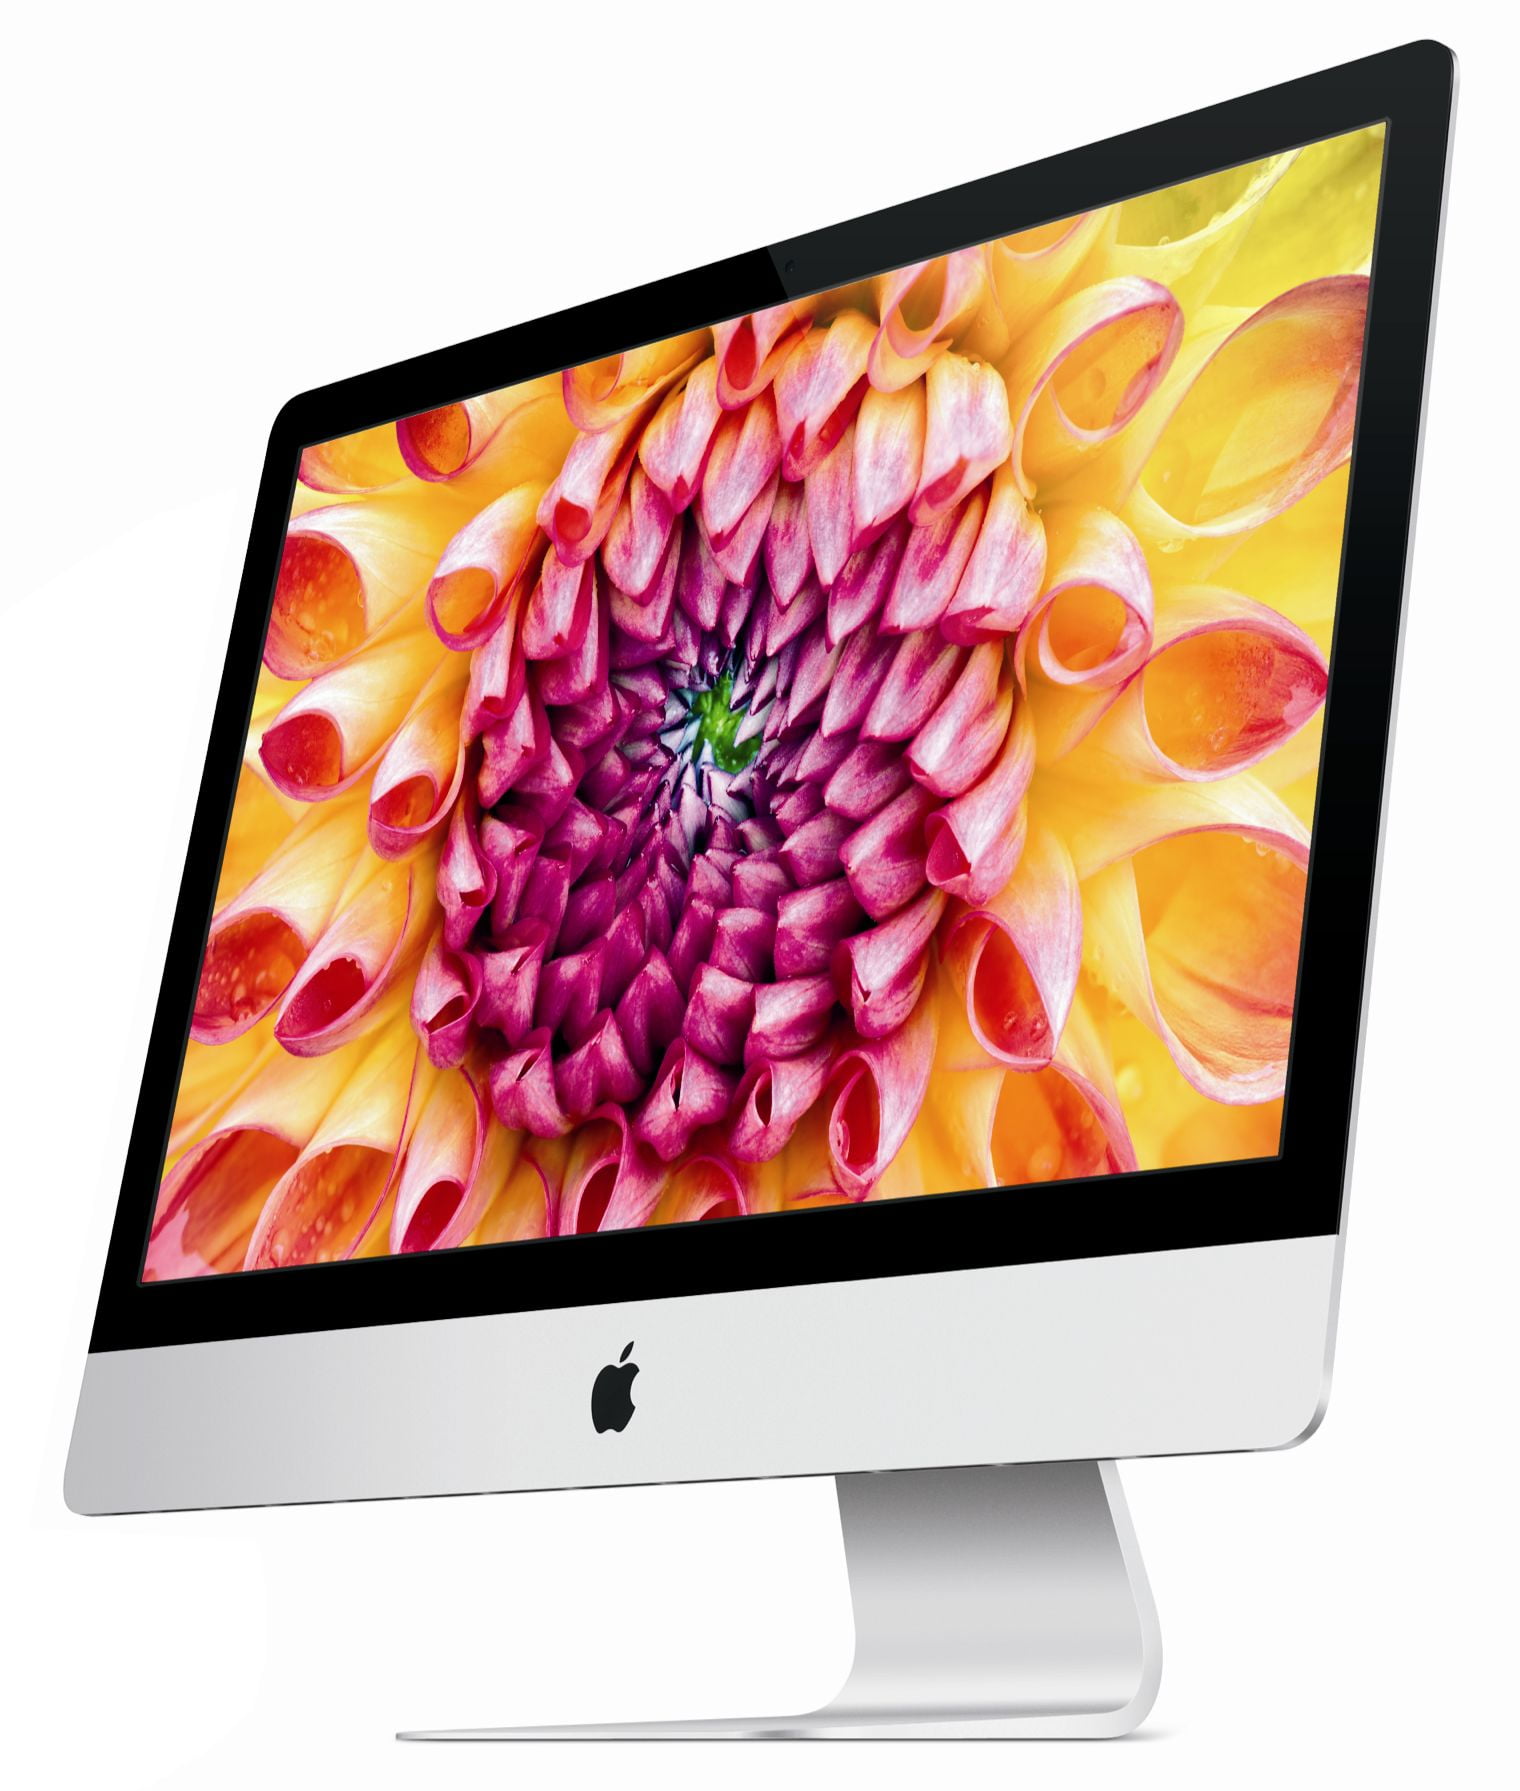 Refurbished Apple A Grade Desktop Computer iMac 21.5-inch (Aluminum) 2.9GHZ Quad Core i5 (Late 2012) MD094LL/A 8 GB DDR4 500 GB HDD 1920 x 1080 Display Sierra 10.12 Includes Keyboard and Mouse